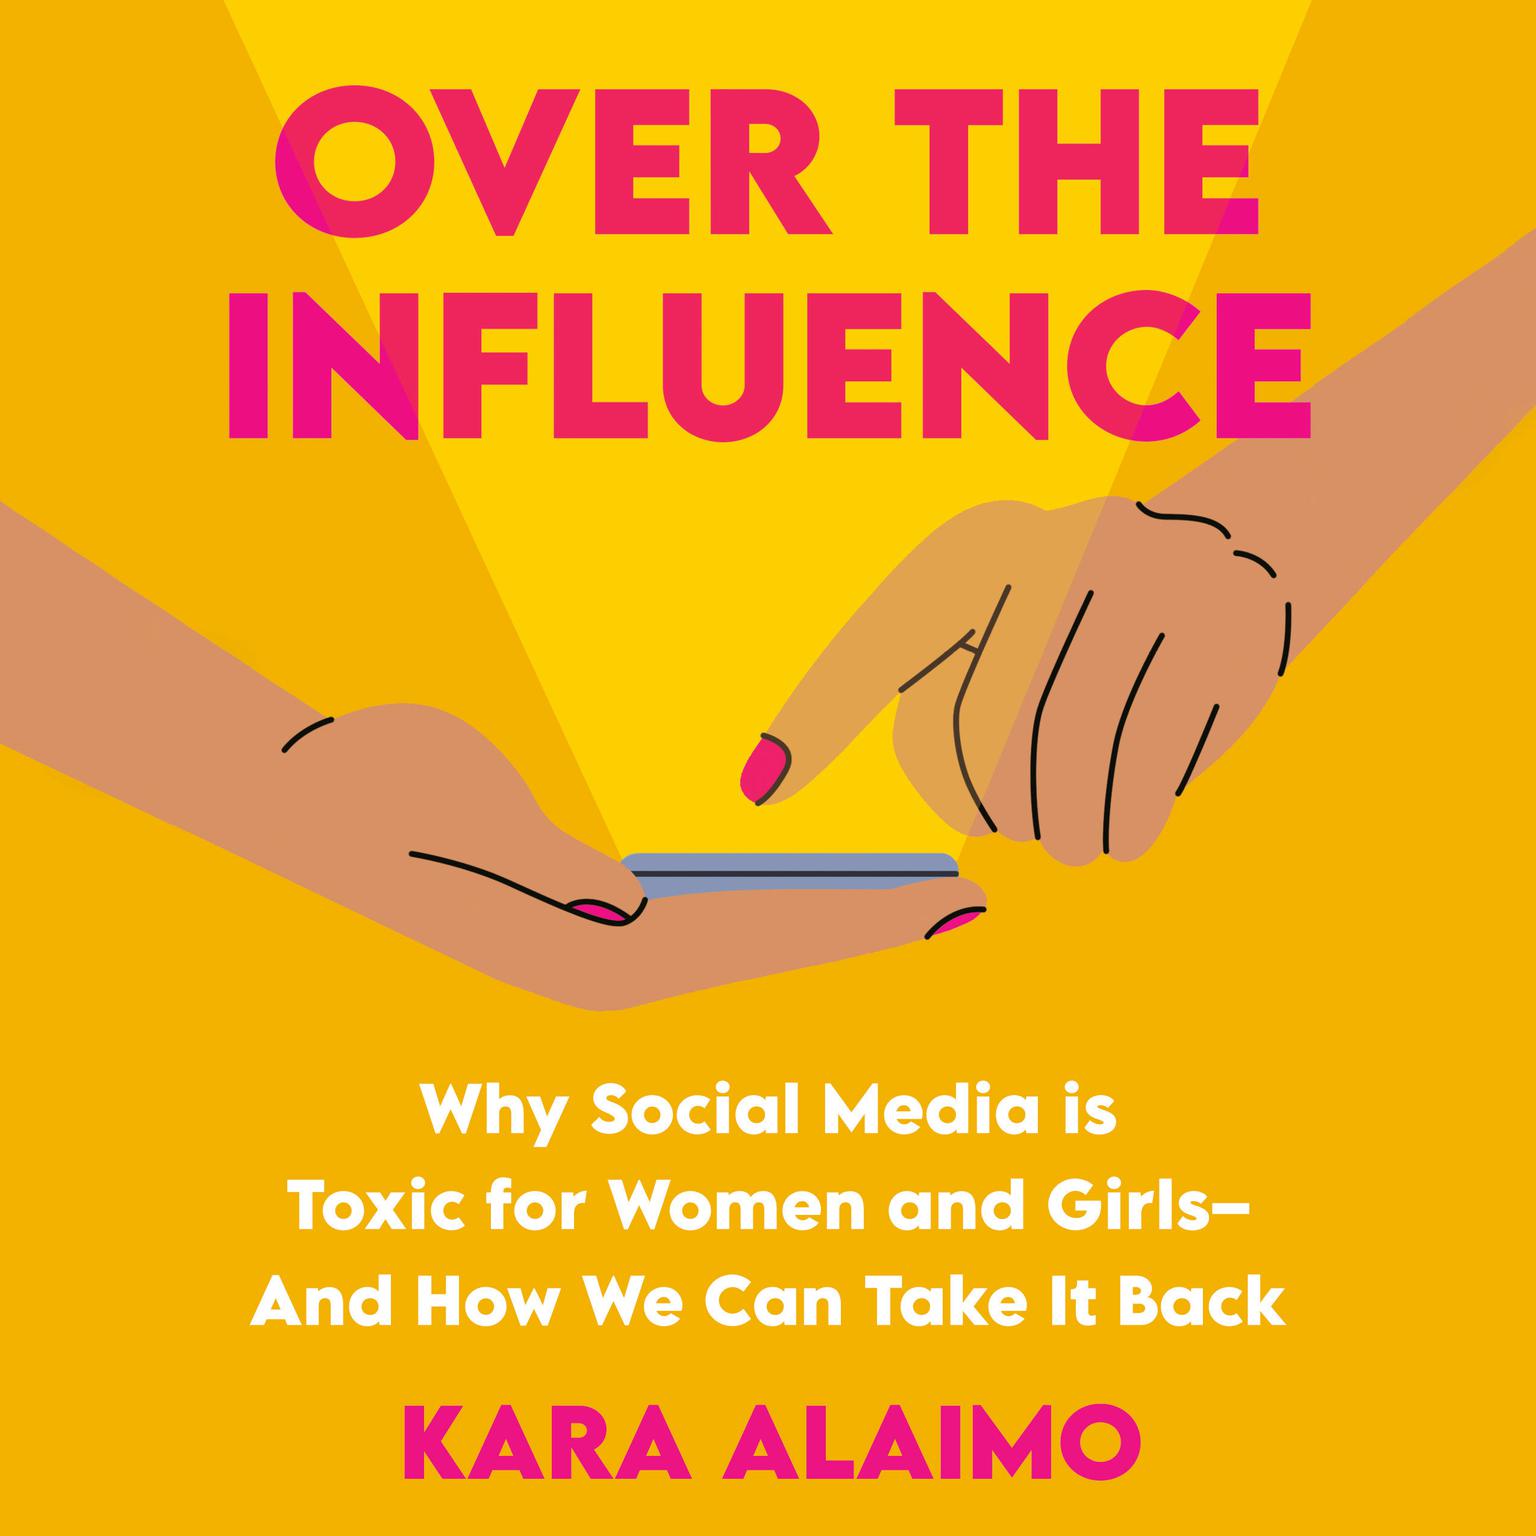 Over the Influence: Why Social Media is Toxic for Women and Girls - And How We Can Take it Back Audiobook, by Kara Alaimo